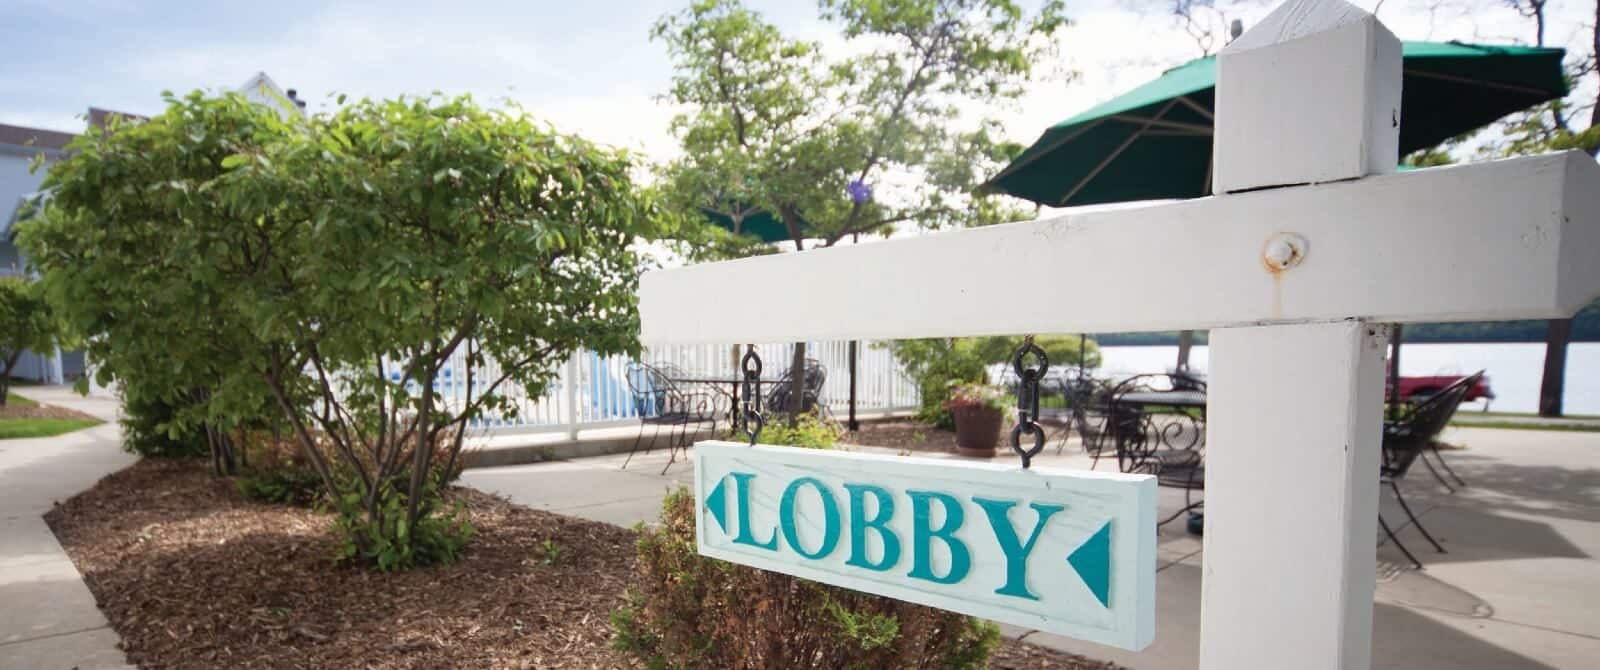 White sign pointing to a lobby next to shrubs and an outdoor patio table